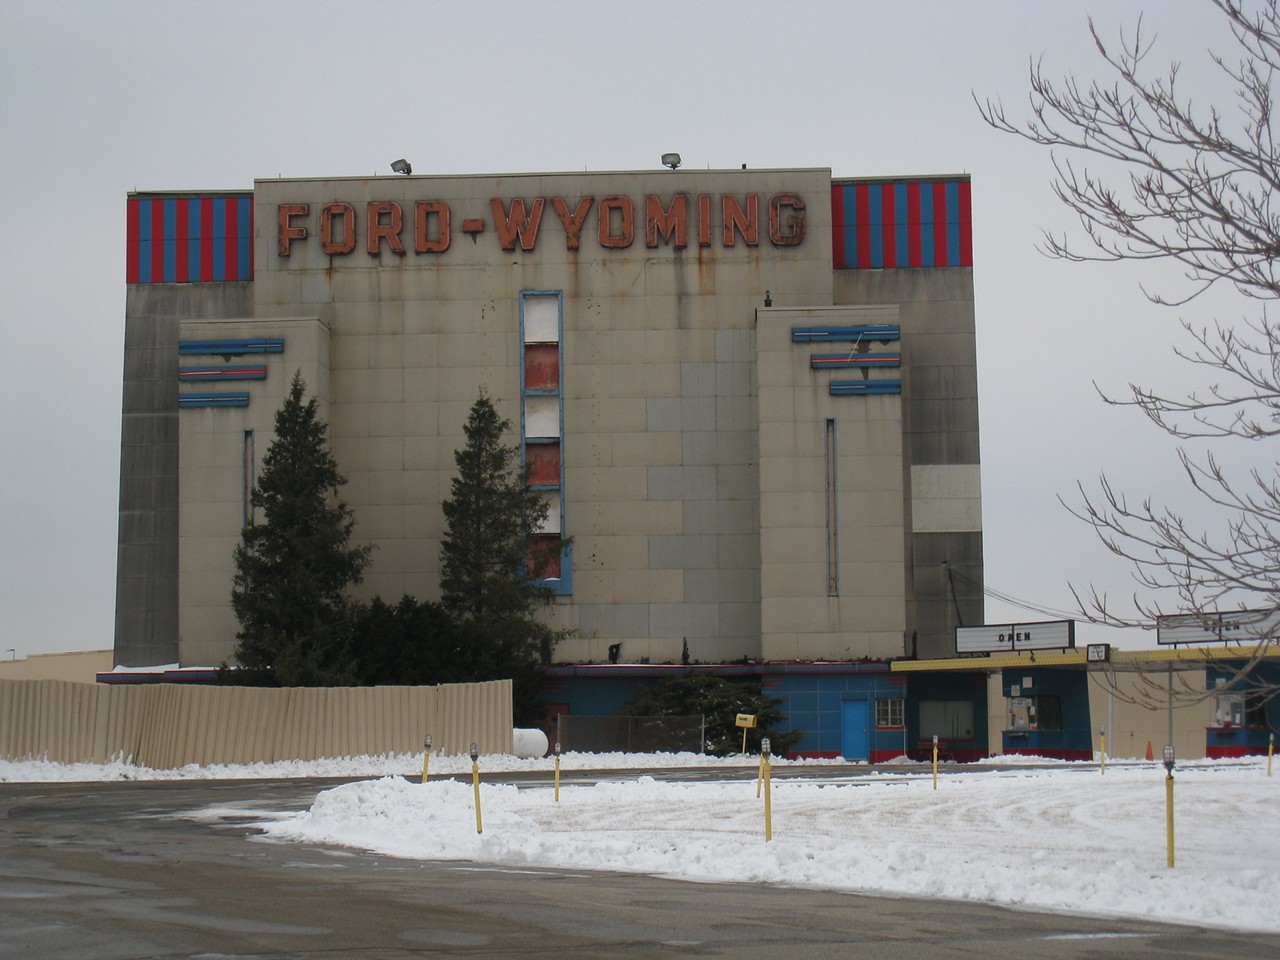 Catch a flick
You can enjoy an evening out without ever leaving your warm car at the Ford-Wyoming Drive-in in Dearborn. With multiple screens, you’ll have a variety of current movies to choose from every weekend during the winter. The 70-year-old drive-in is a metro Detroit staple. With FM radio and wifi streaming audio, you don’t even have to open your window for an external speaker. Just pack your car full of snacks, drinks, pillows, and a blanket, and you’re all set for a fun, warm evening. —Steve Neavling